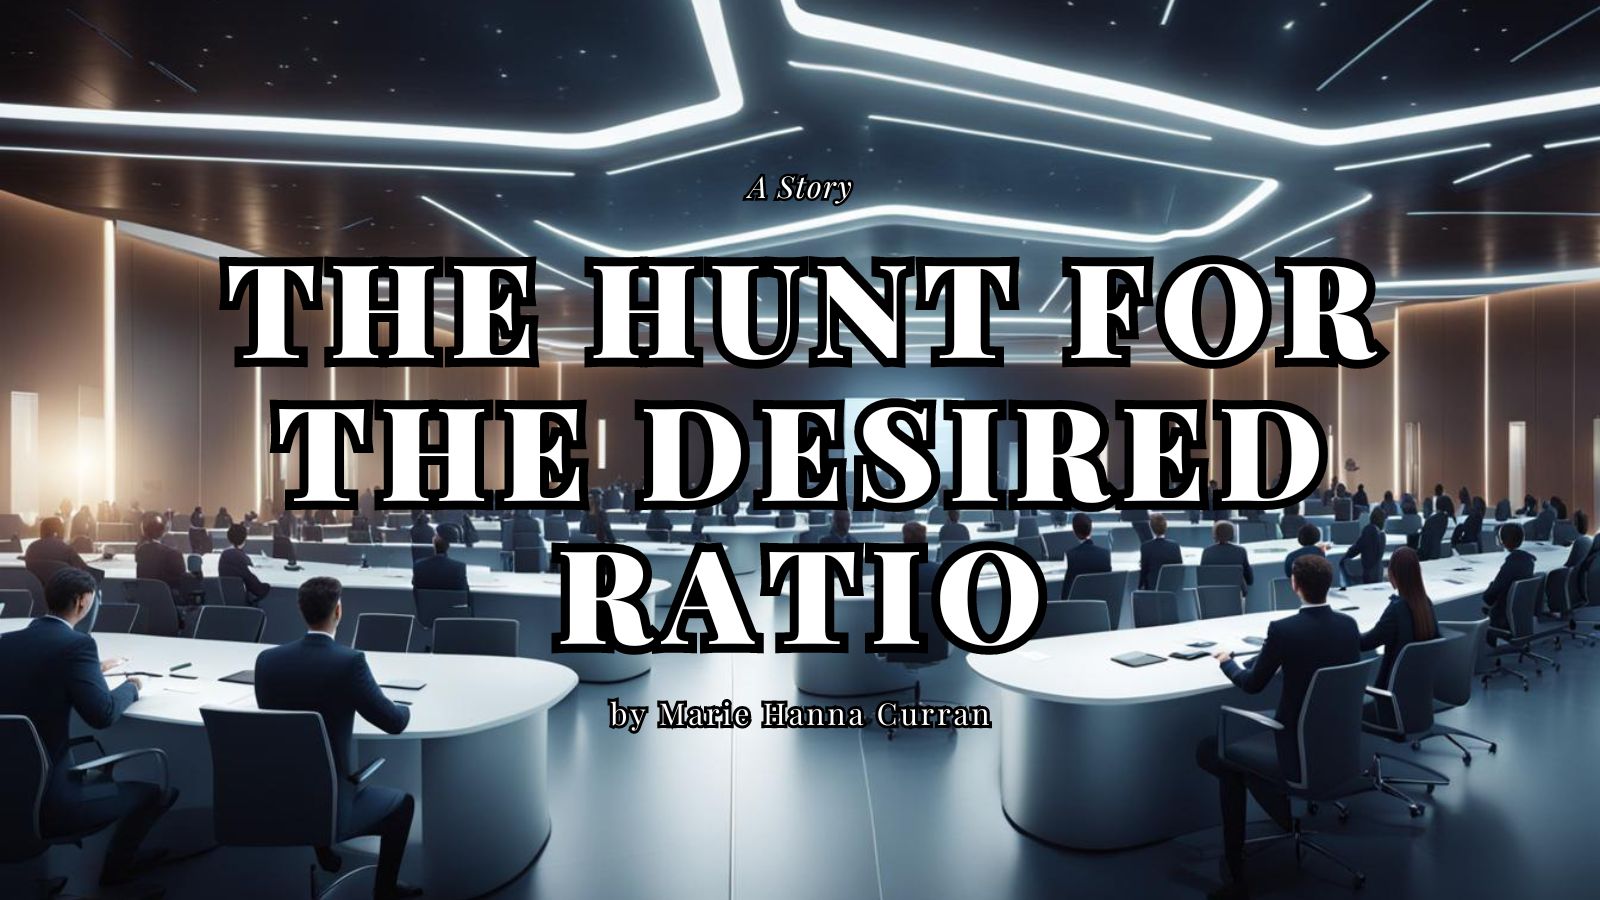 The hunt for the desired ratio by Marie Hanna Curran